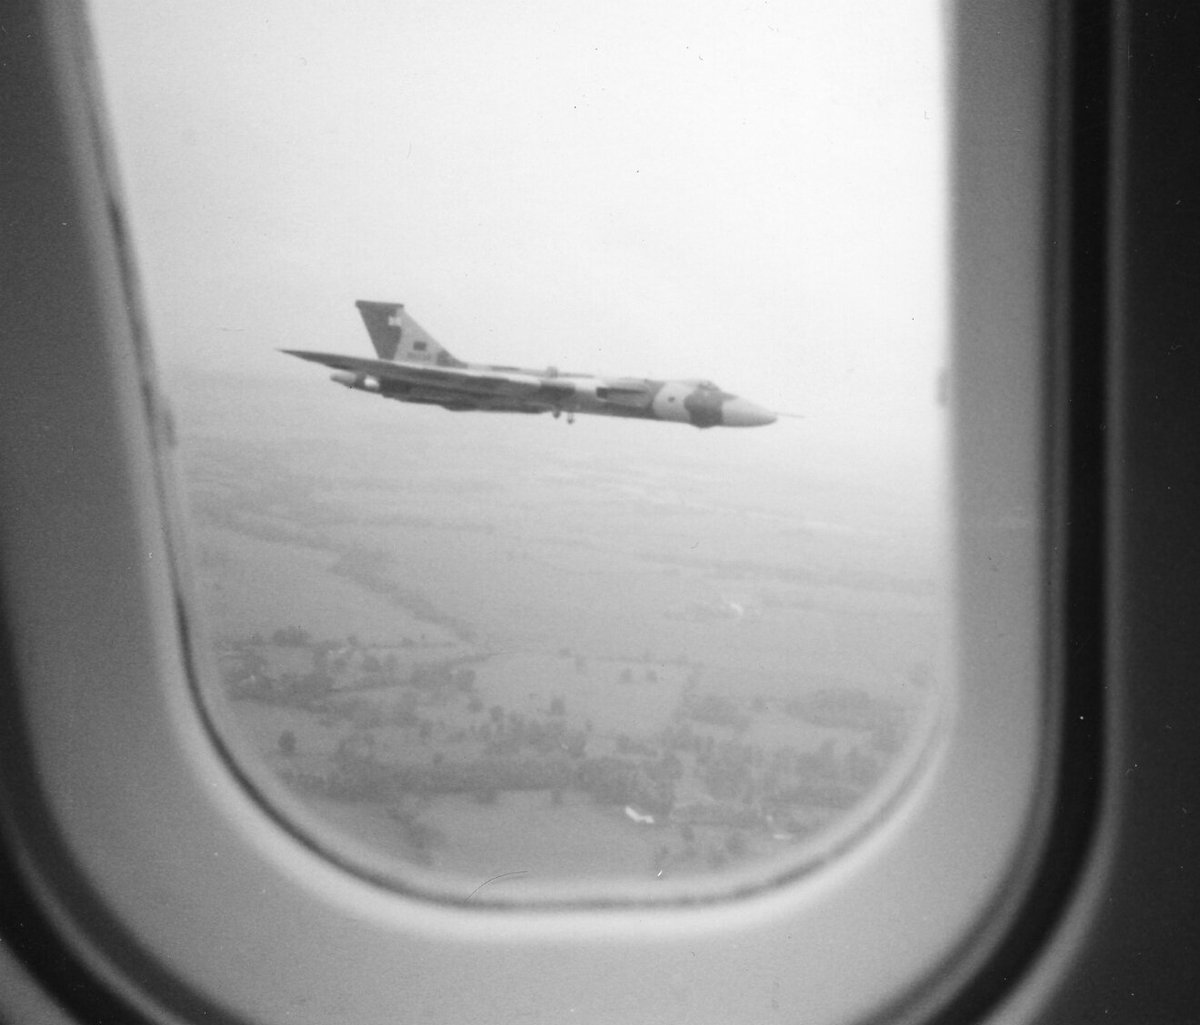 Vulcan XH558 taken from the window of none other than Concorde. Suprised to see the airbrakes out! @VulcanSCentral